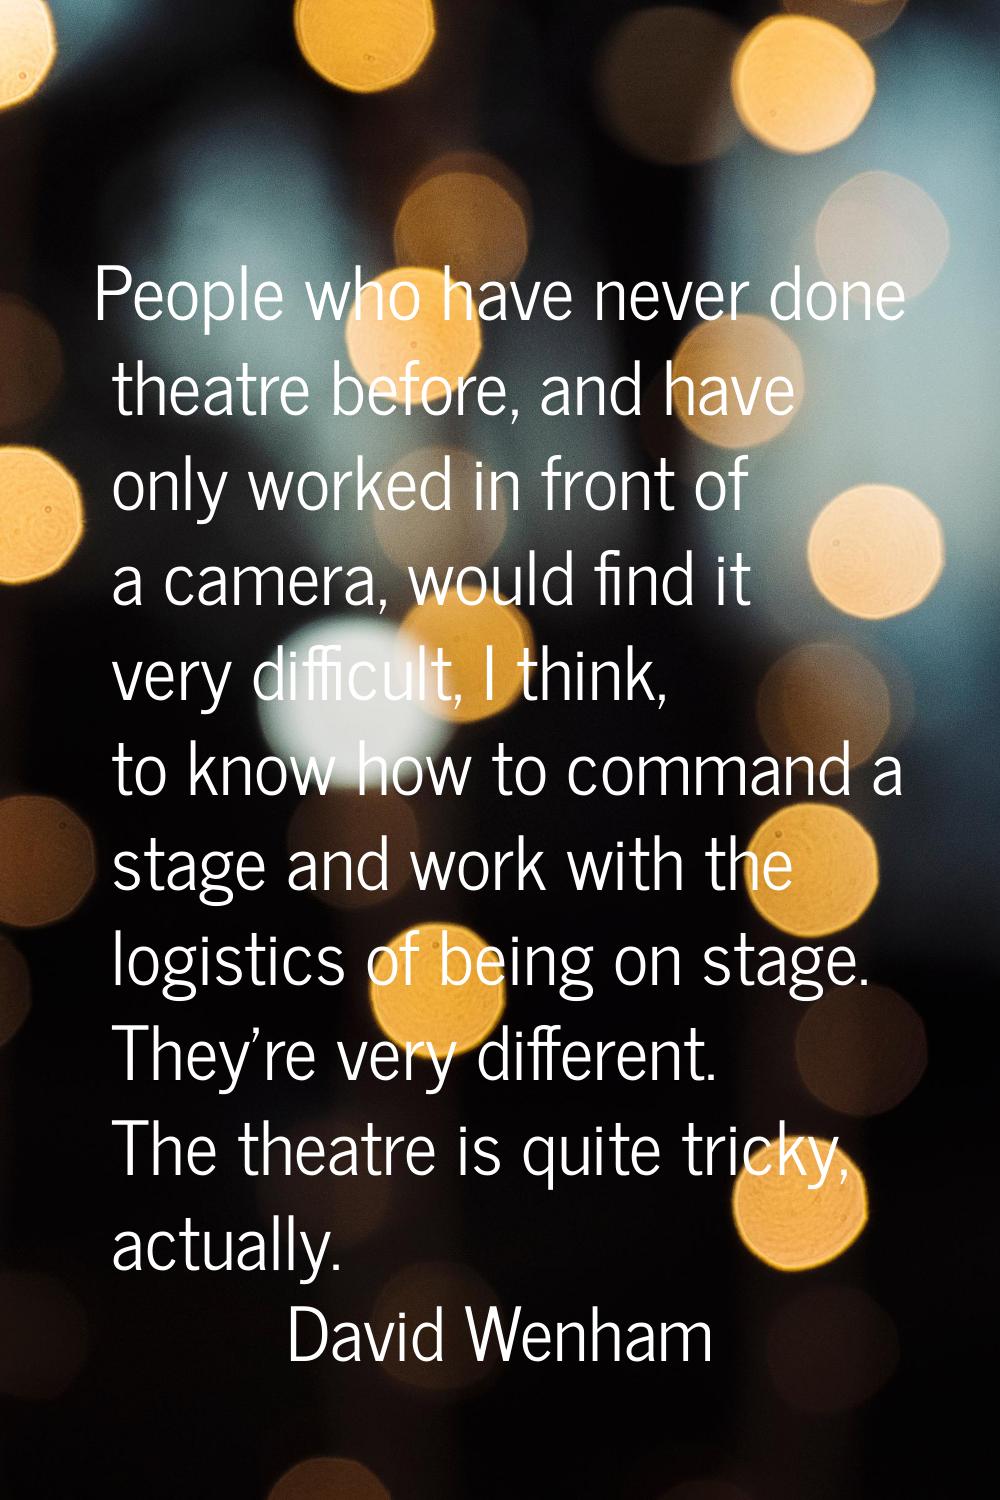 People who have never done theatre before, and have only worked in front of a camera, would find it